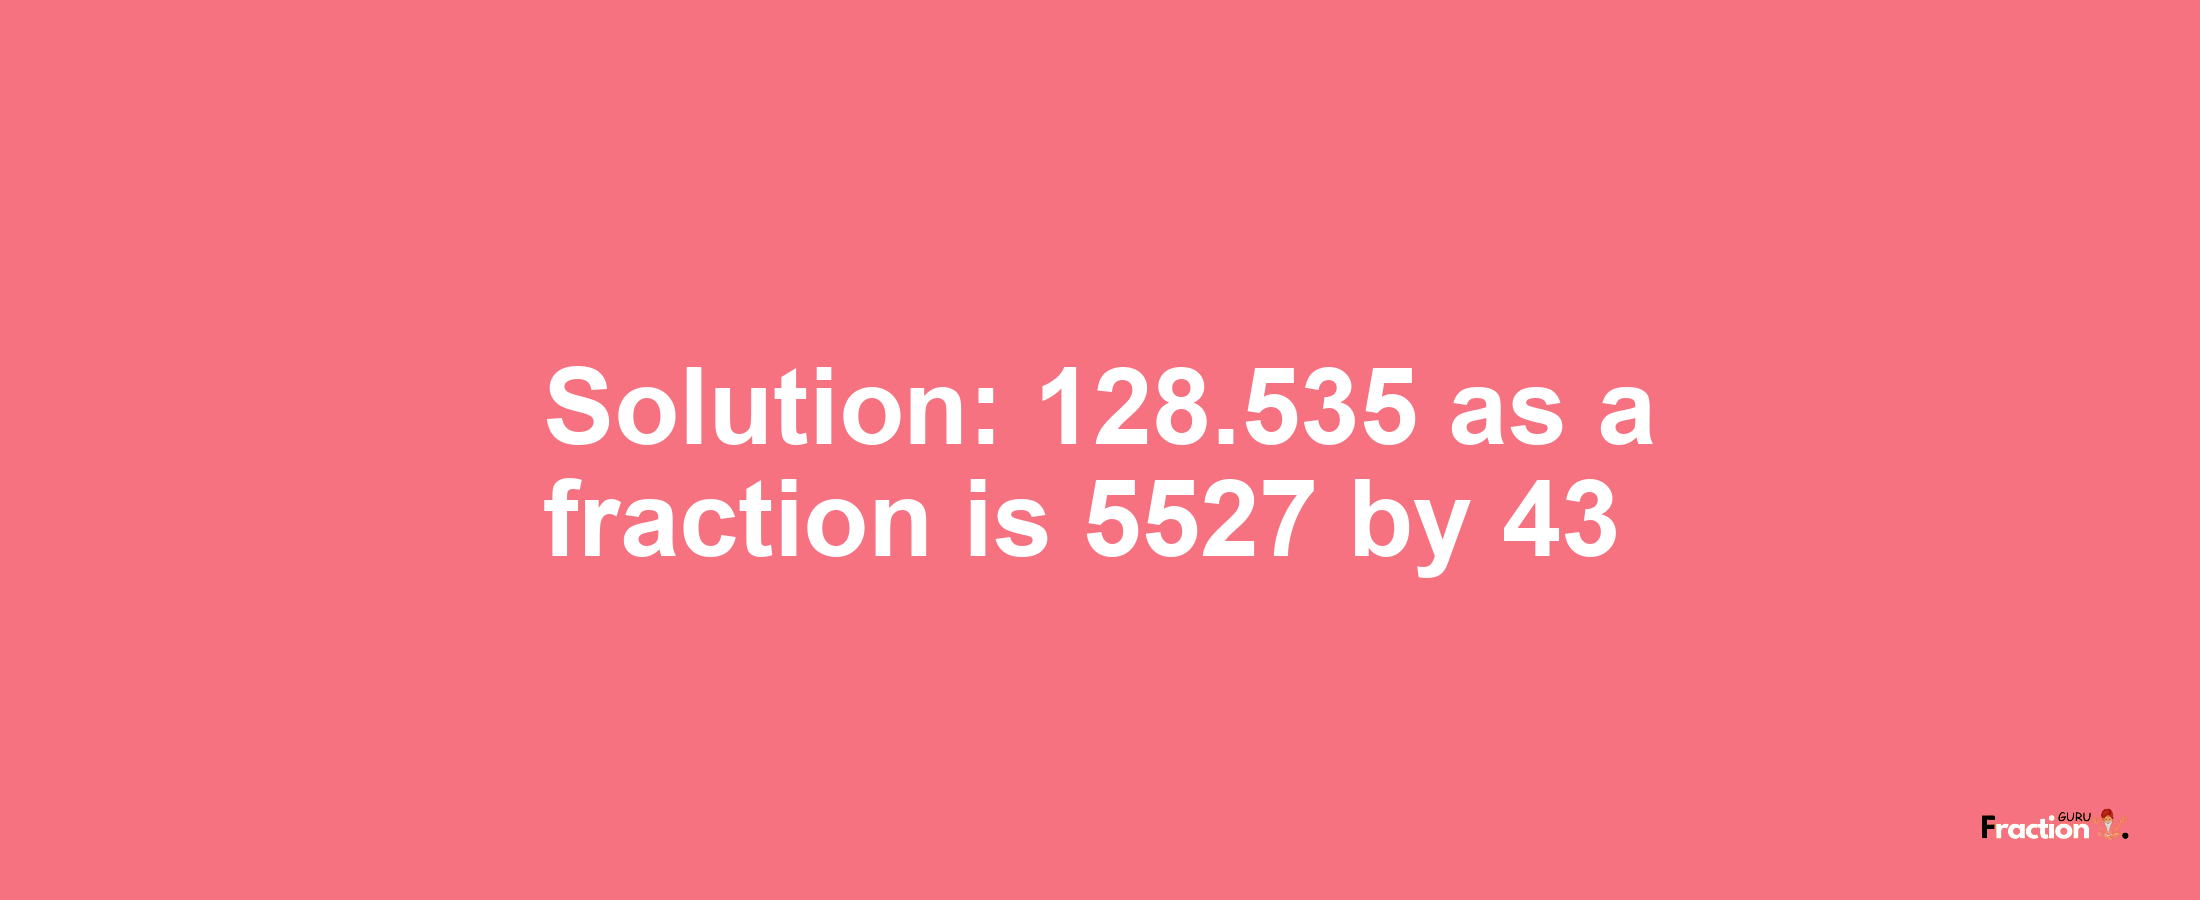 Solution:128.535 as a fraction is 5527/43